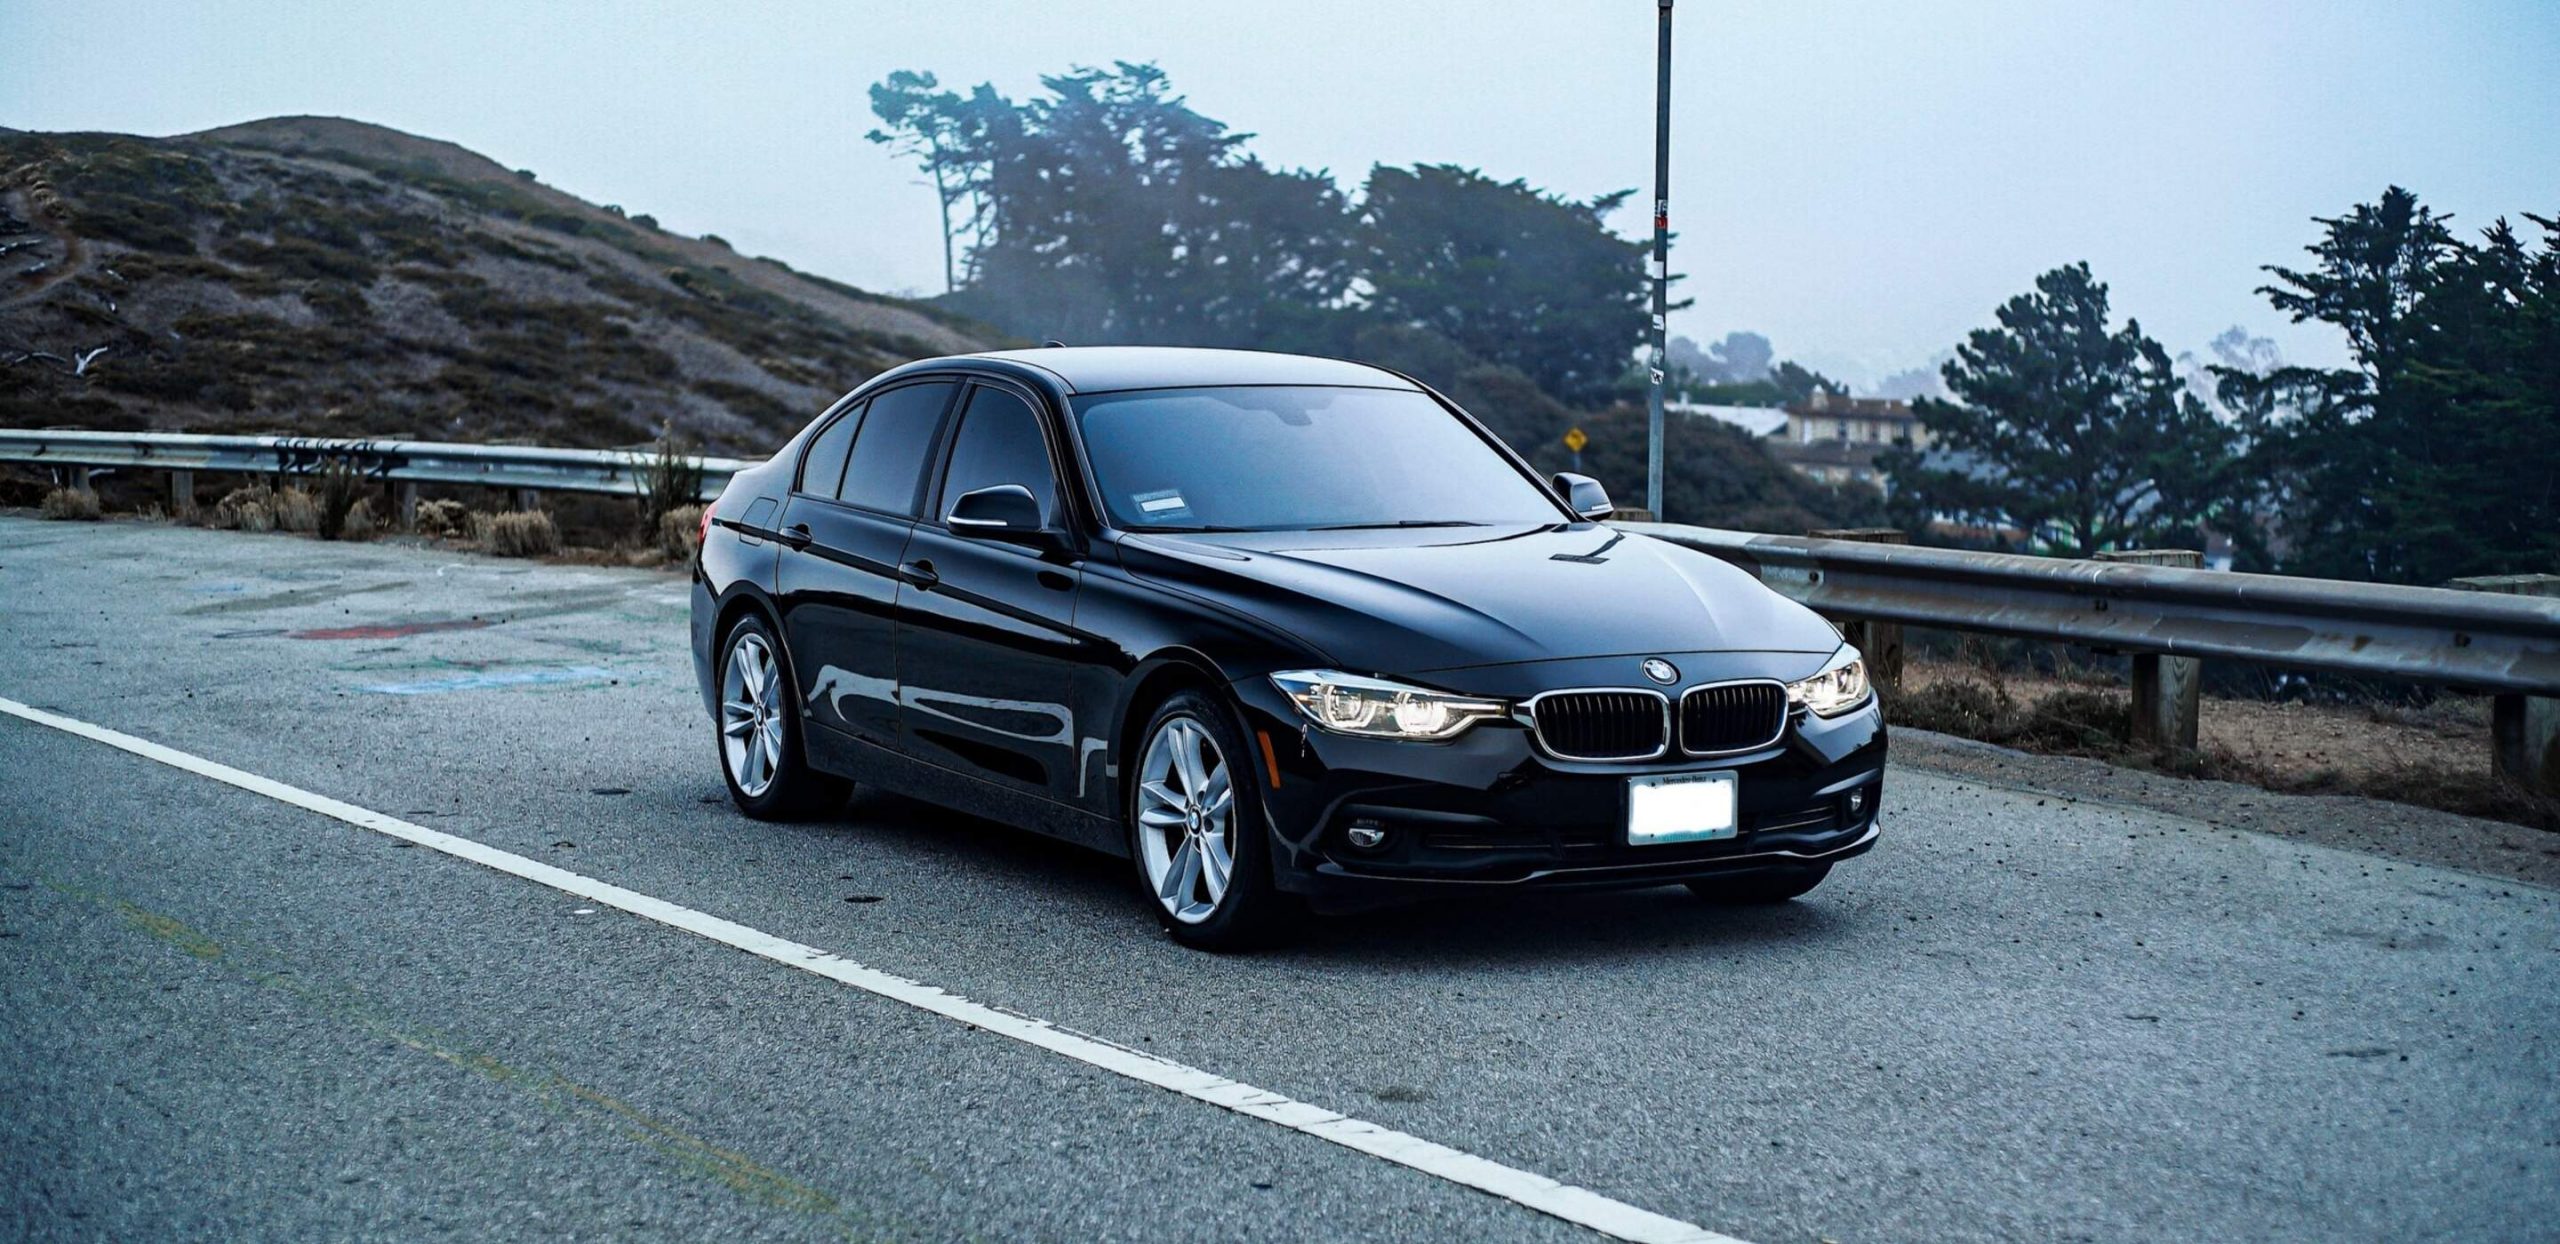 2018-bmw-3-series-black-featured-image